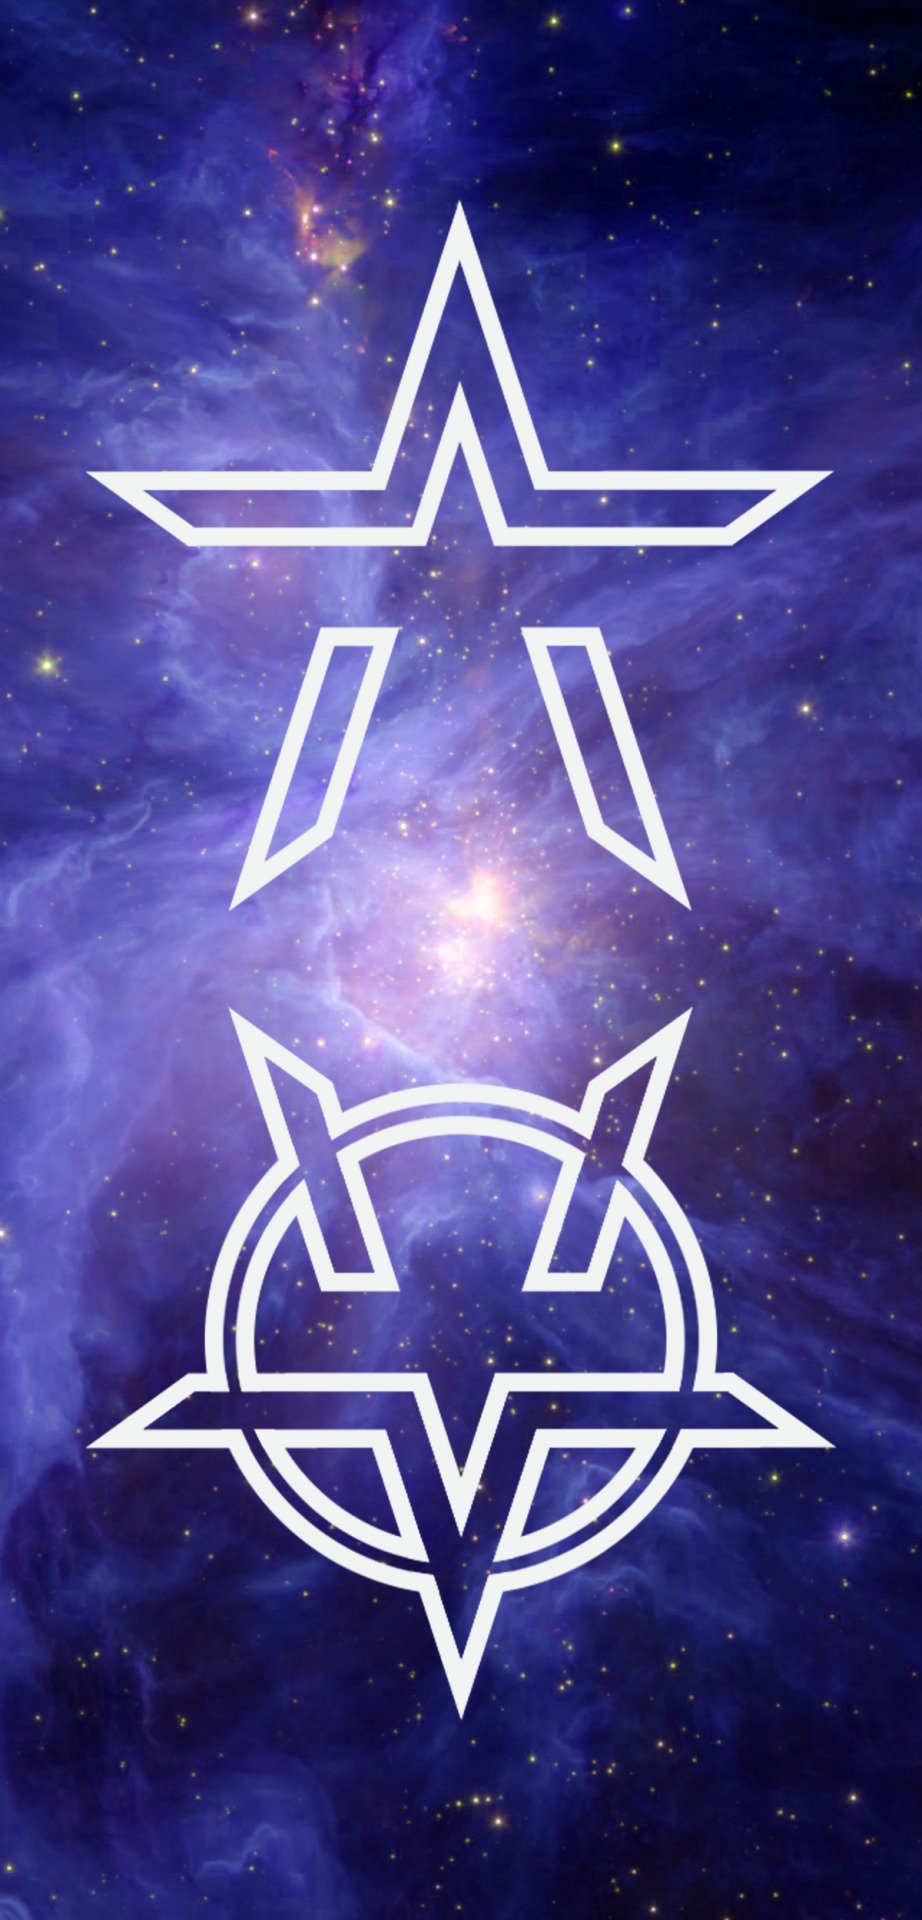 just another lockscreen blog  lockscreens for the band starsets logo  by